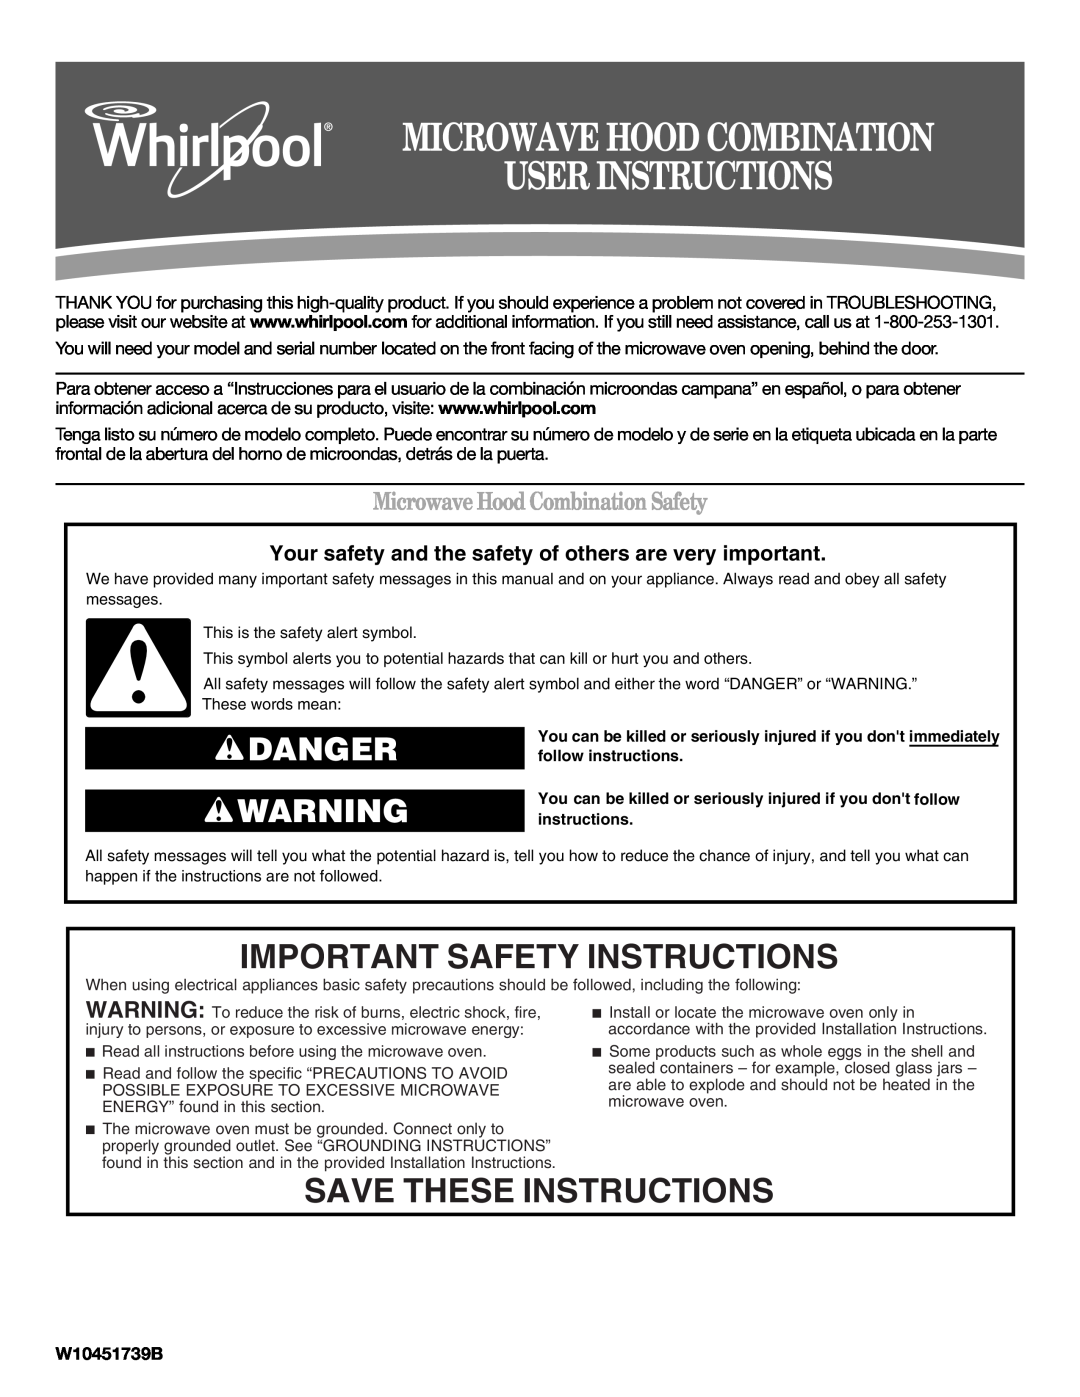 Whirlpool W10451739B important safety instructions Important Safety Instructions, Save These Instructions, Danger 